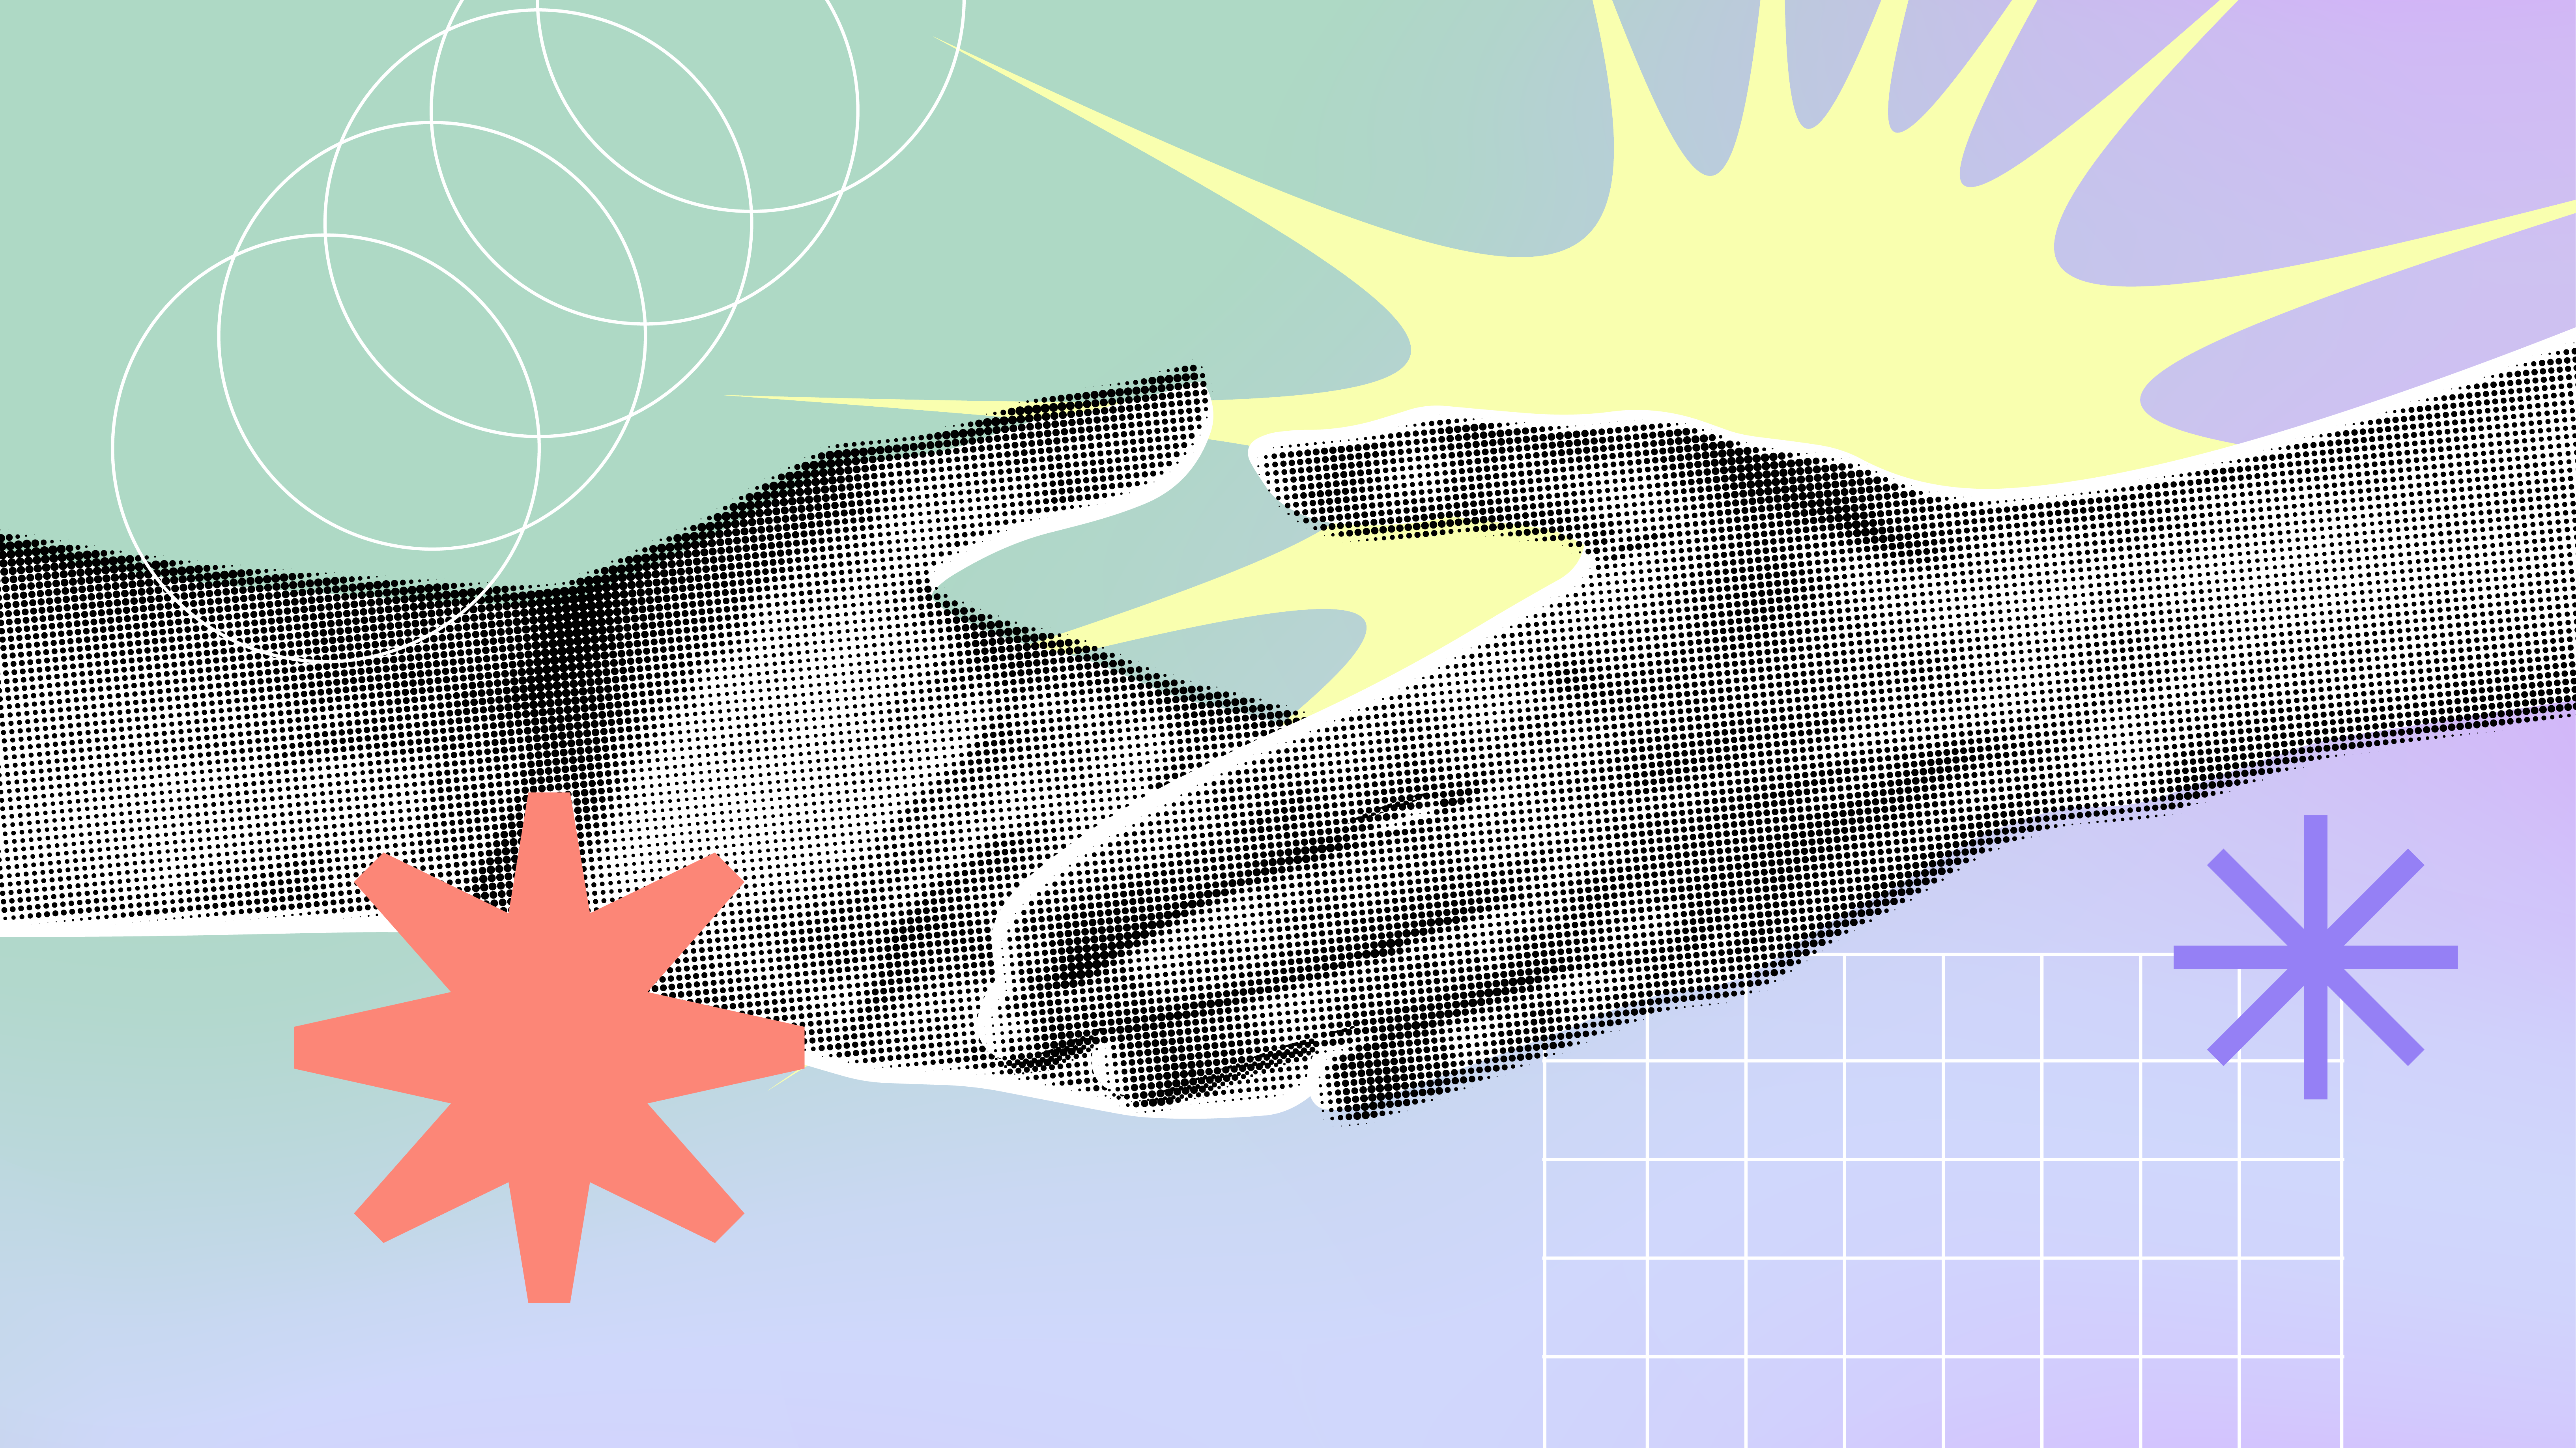 Two hands reaching out to each other, symbolizing the formation of a partnership.